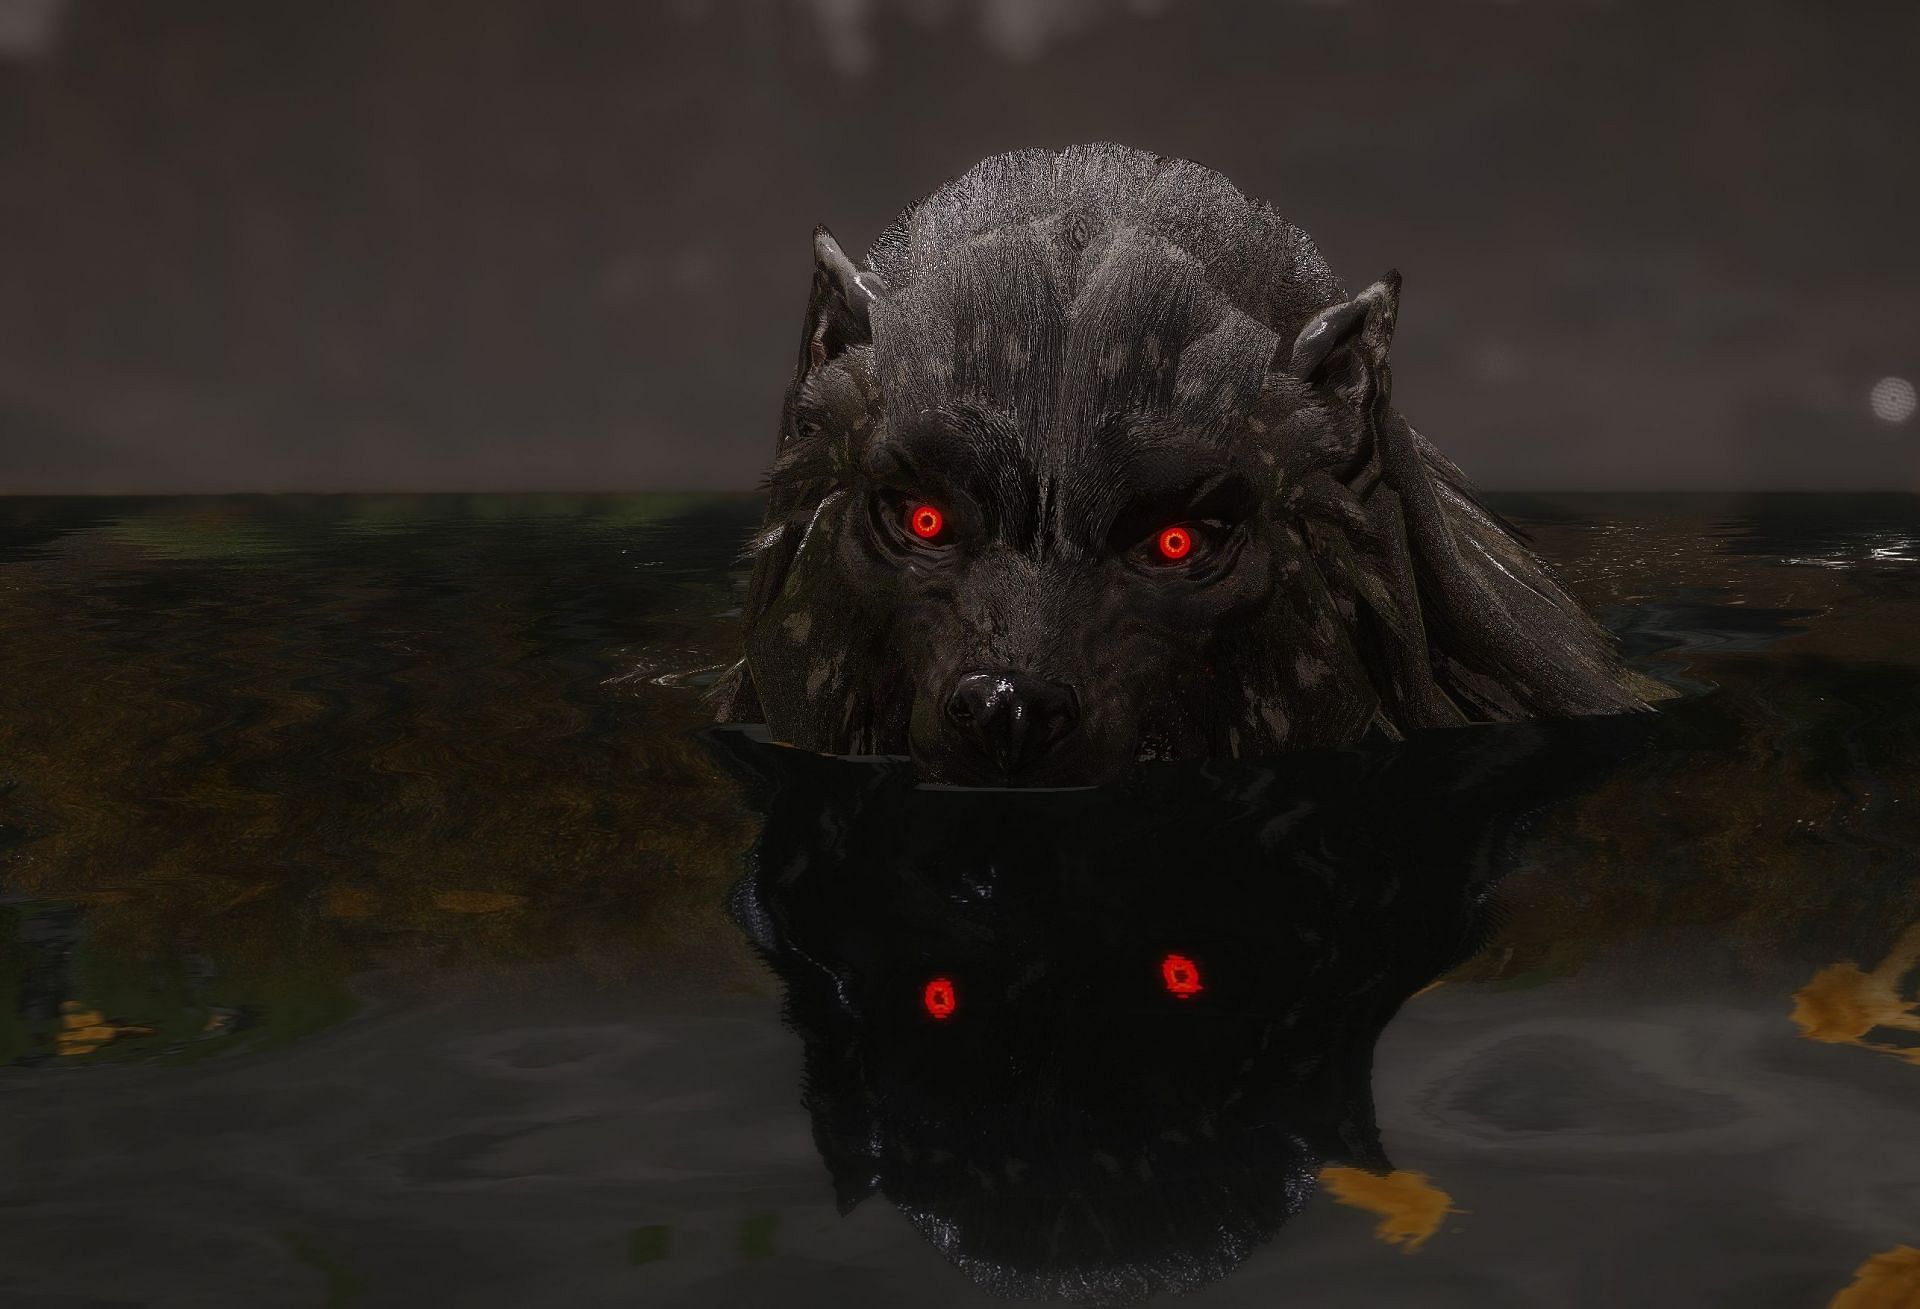 Lycanthropy is a new feature that was not there before Skyrim (Image via Nexusmods)